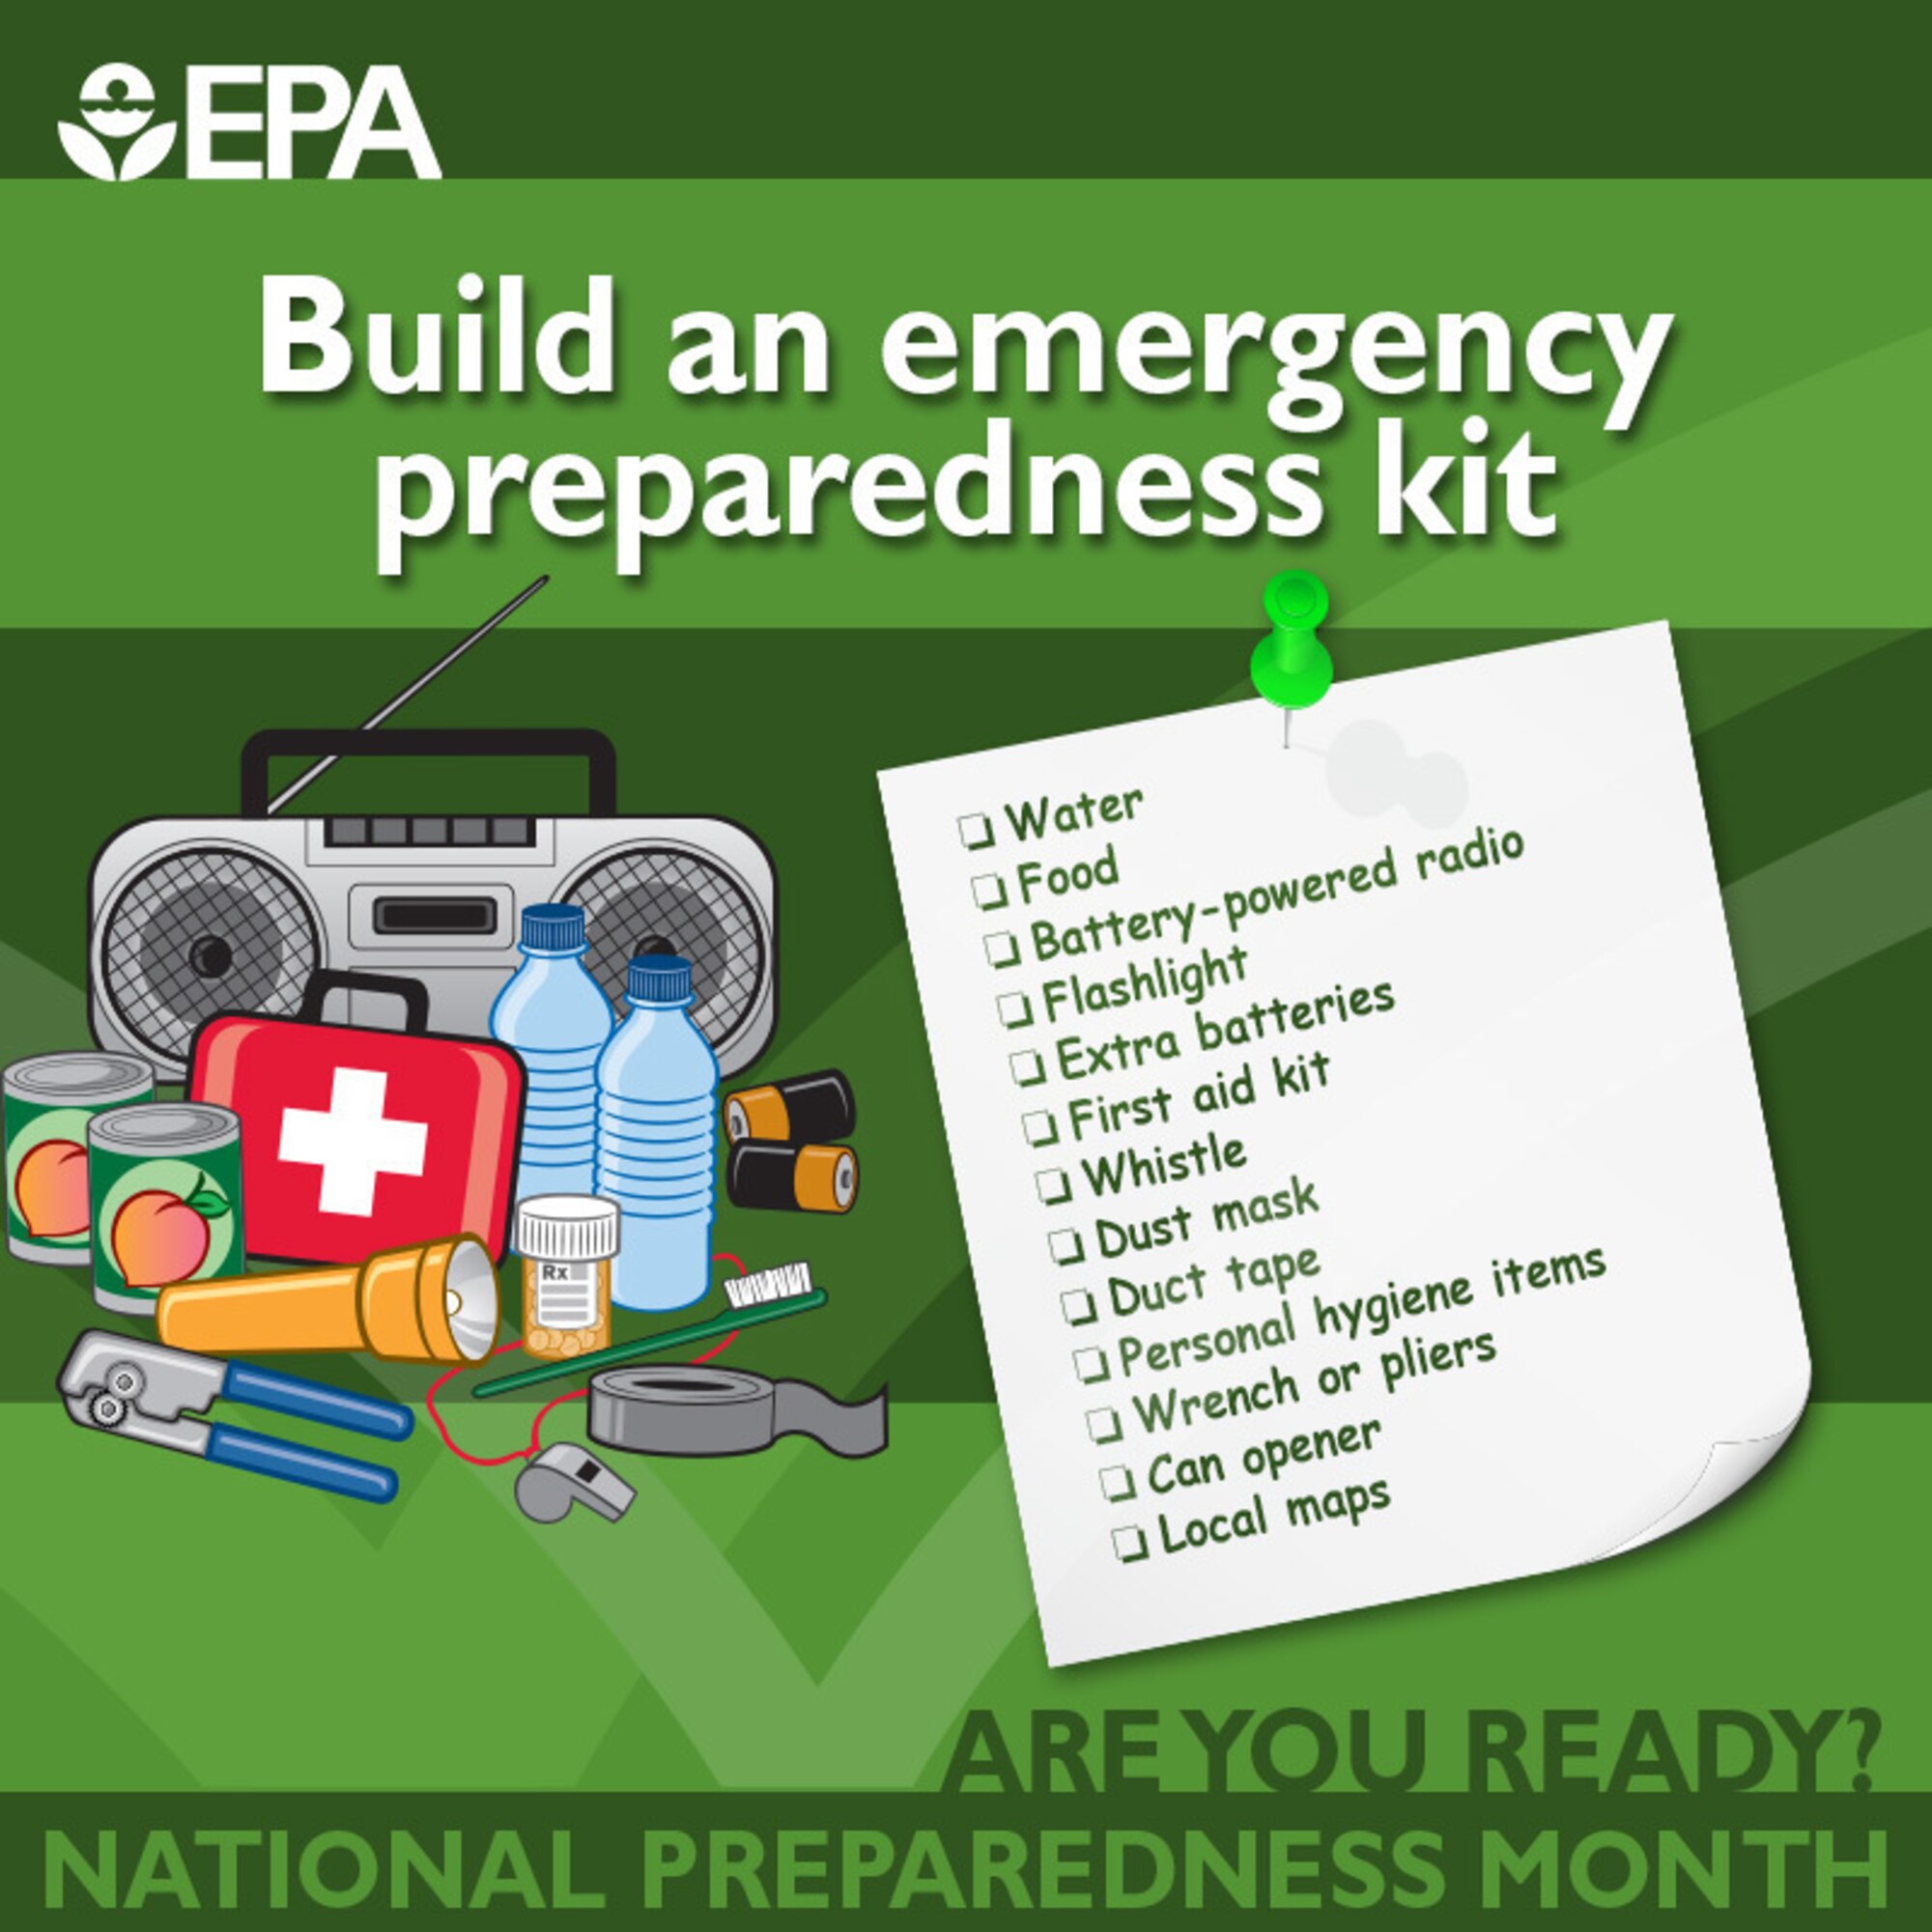 This is an infographic for emergency preparedness month on items to include in an emergency kit.